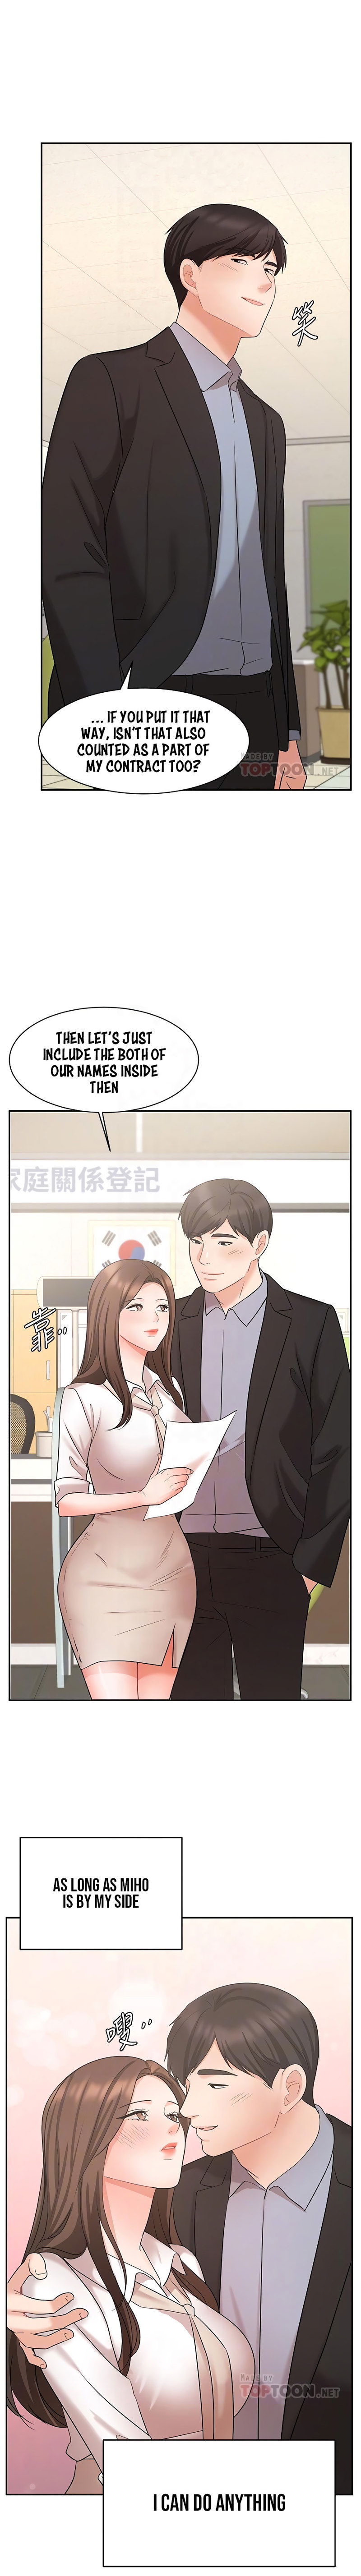 sold-out-girl-chap-45-10